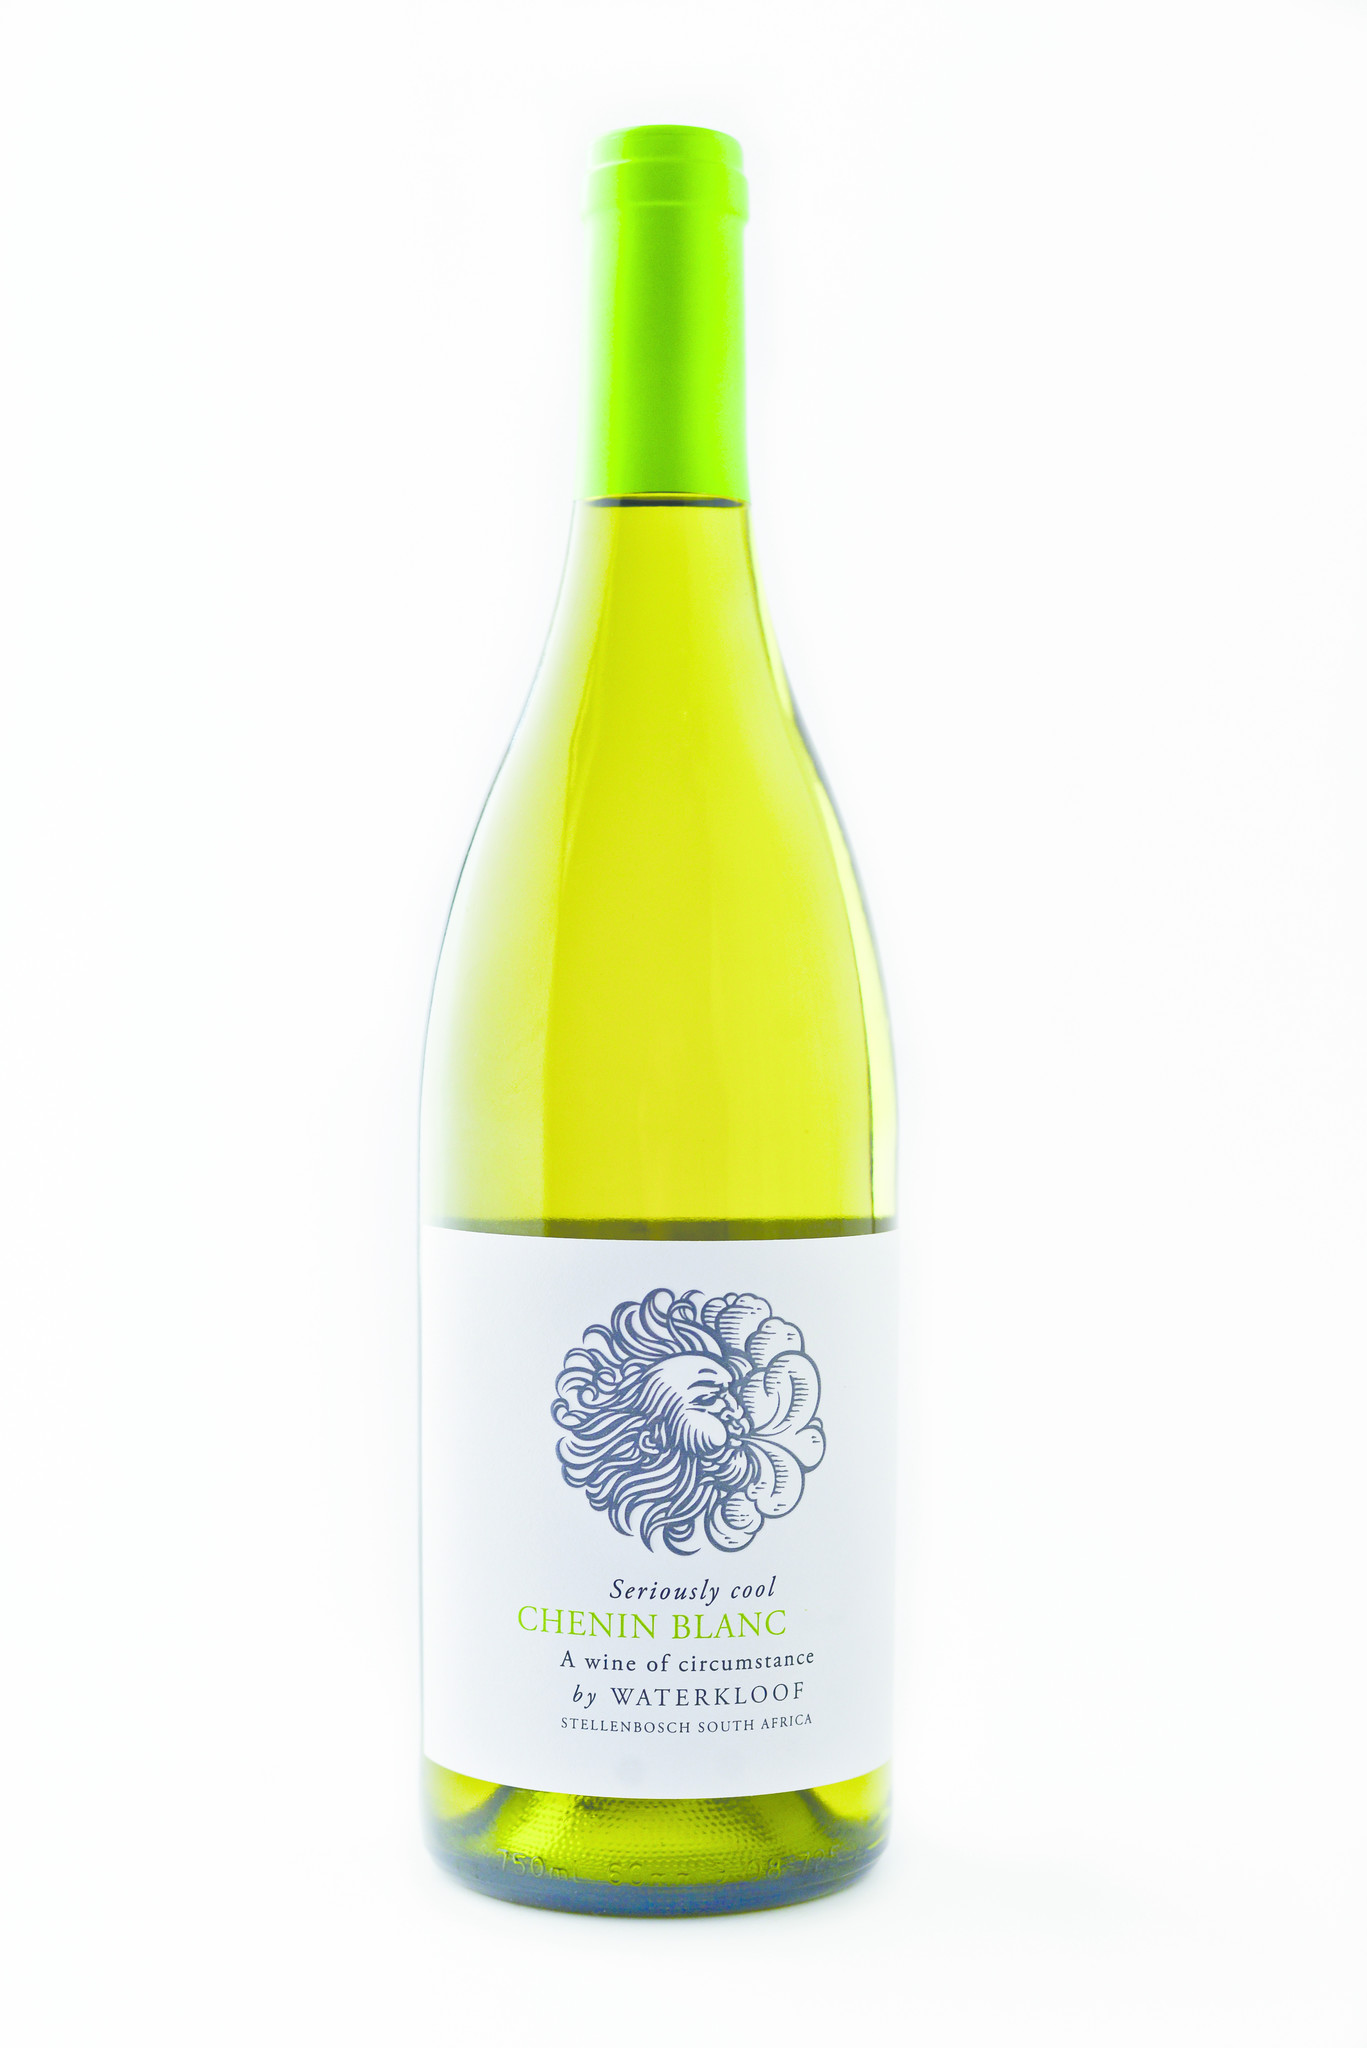 Waterkloof - Seriously Cool - Chenin Blanc - 2021 - 75cl